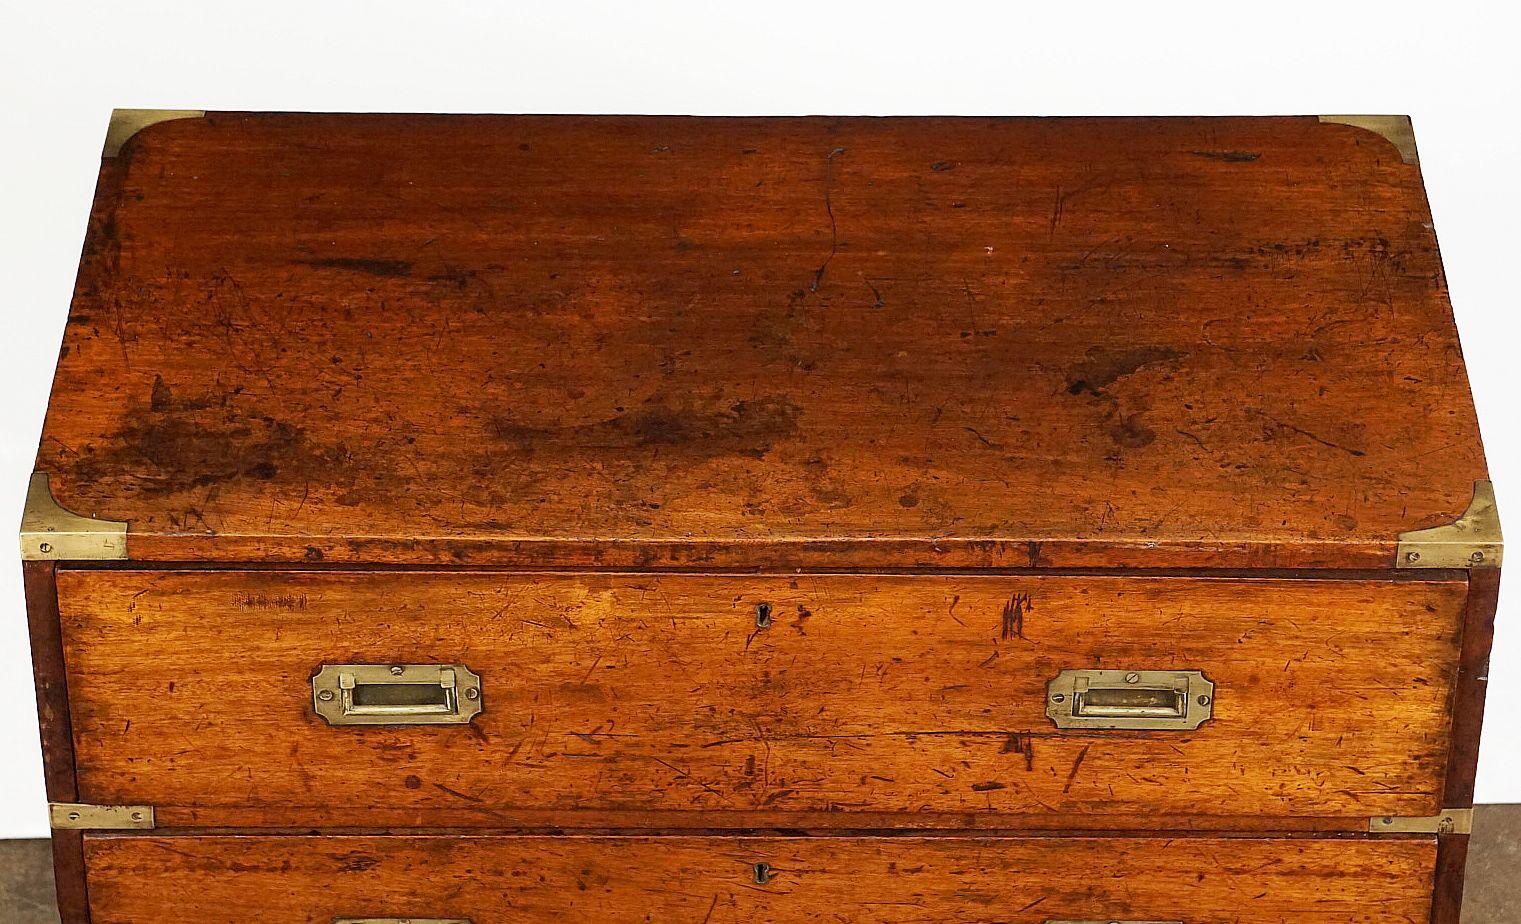 British Military Officer's Campaign Chest or Dresser of Brass-Bound Mahogany 7